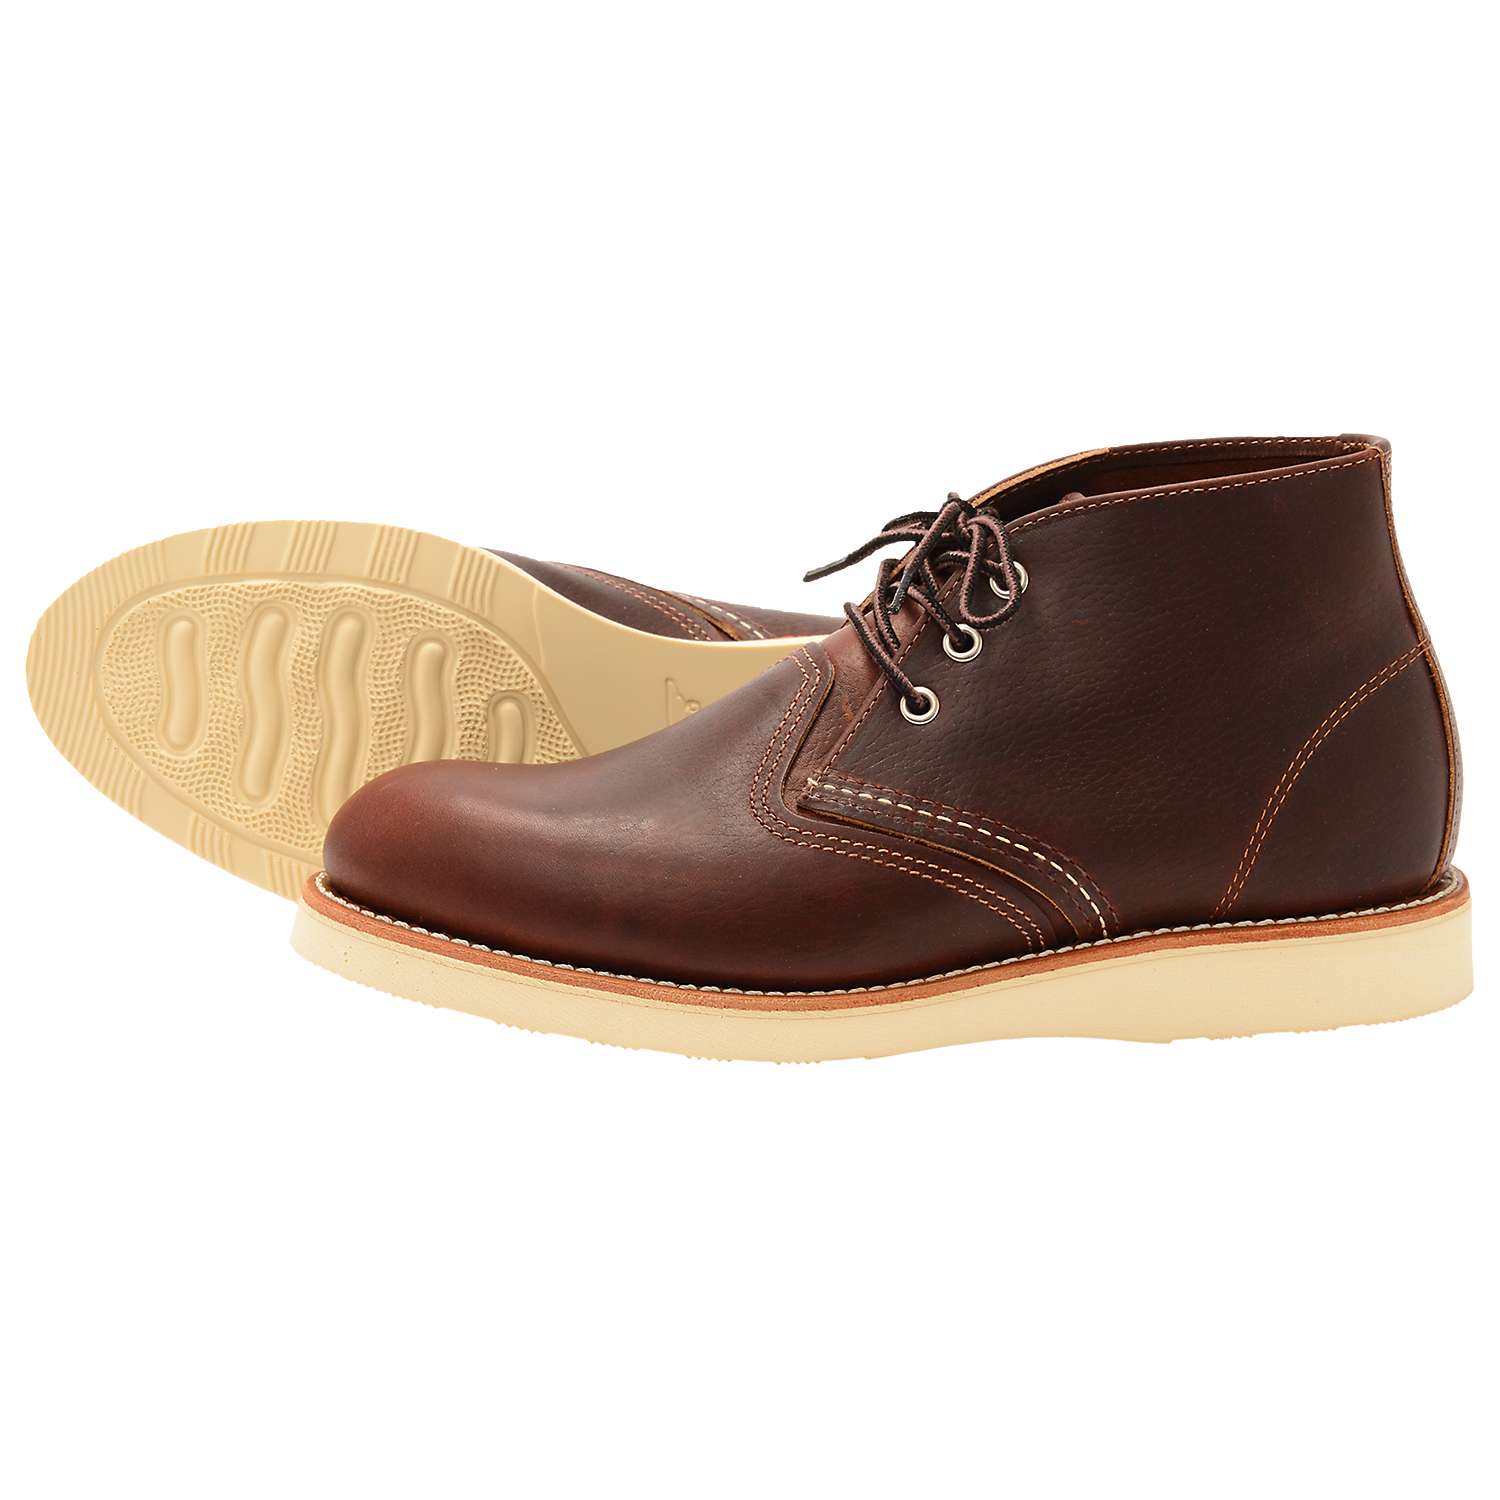 Buy Red Wing 3141 Work Chukka Boot, Briar Oil Slick Online at johnlewis.com